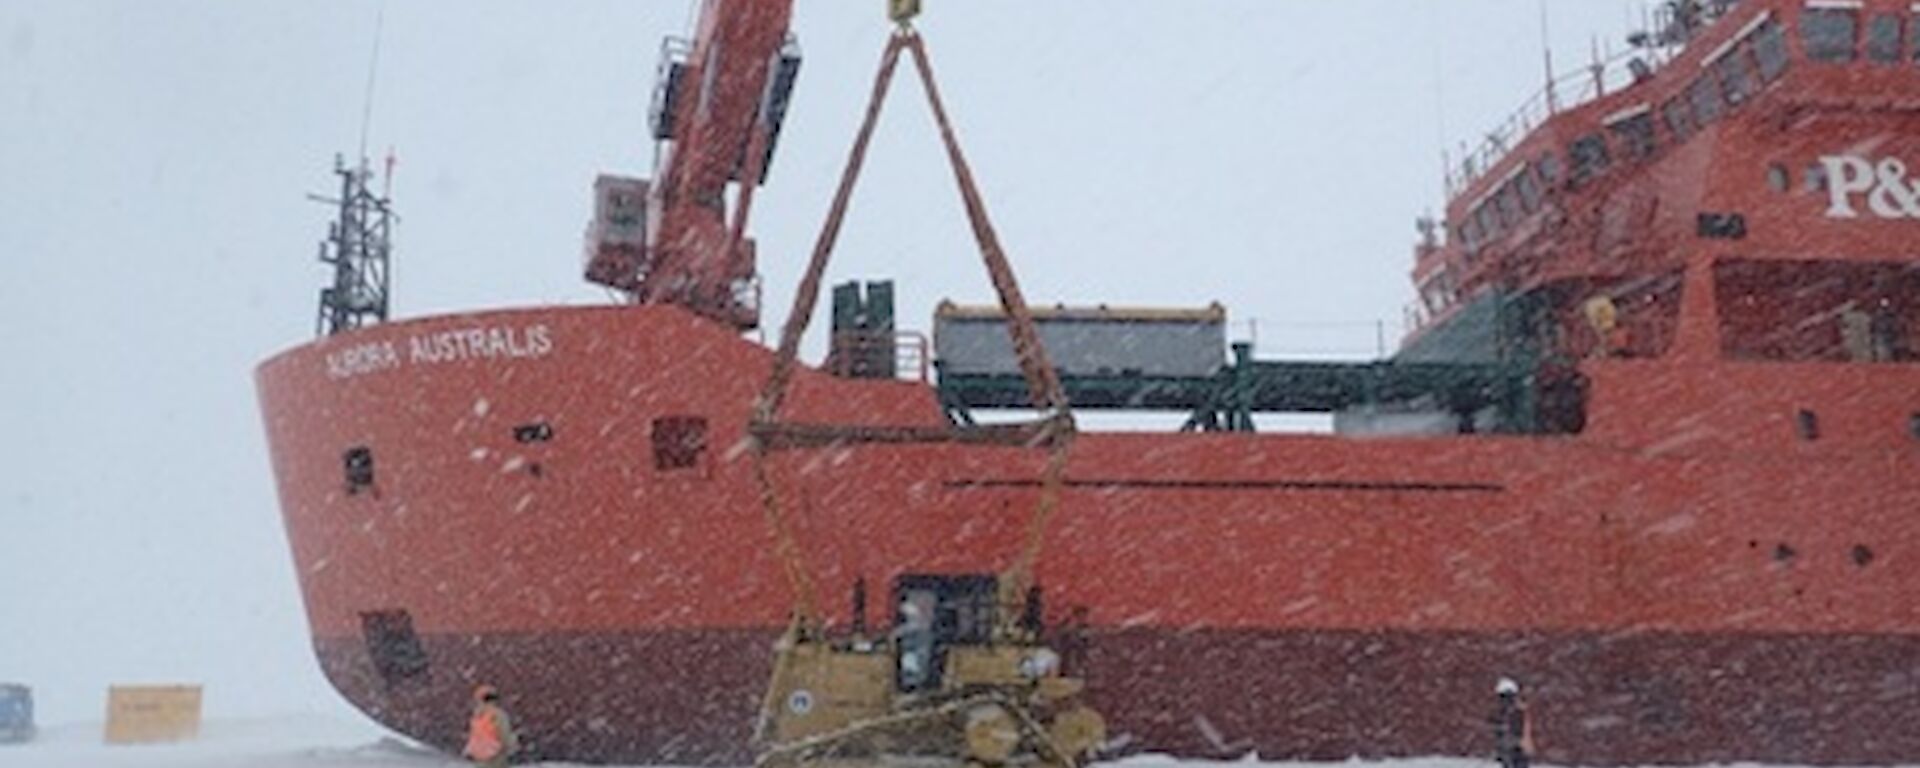 A bulldozer is loaded from the ice onto large icebreaker ship Aurora Australis for return to Australia